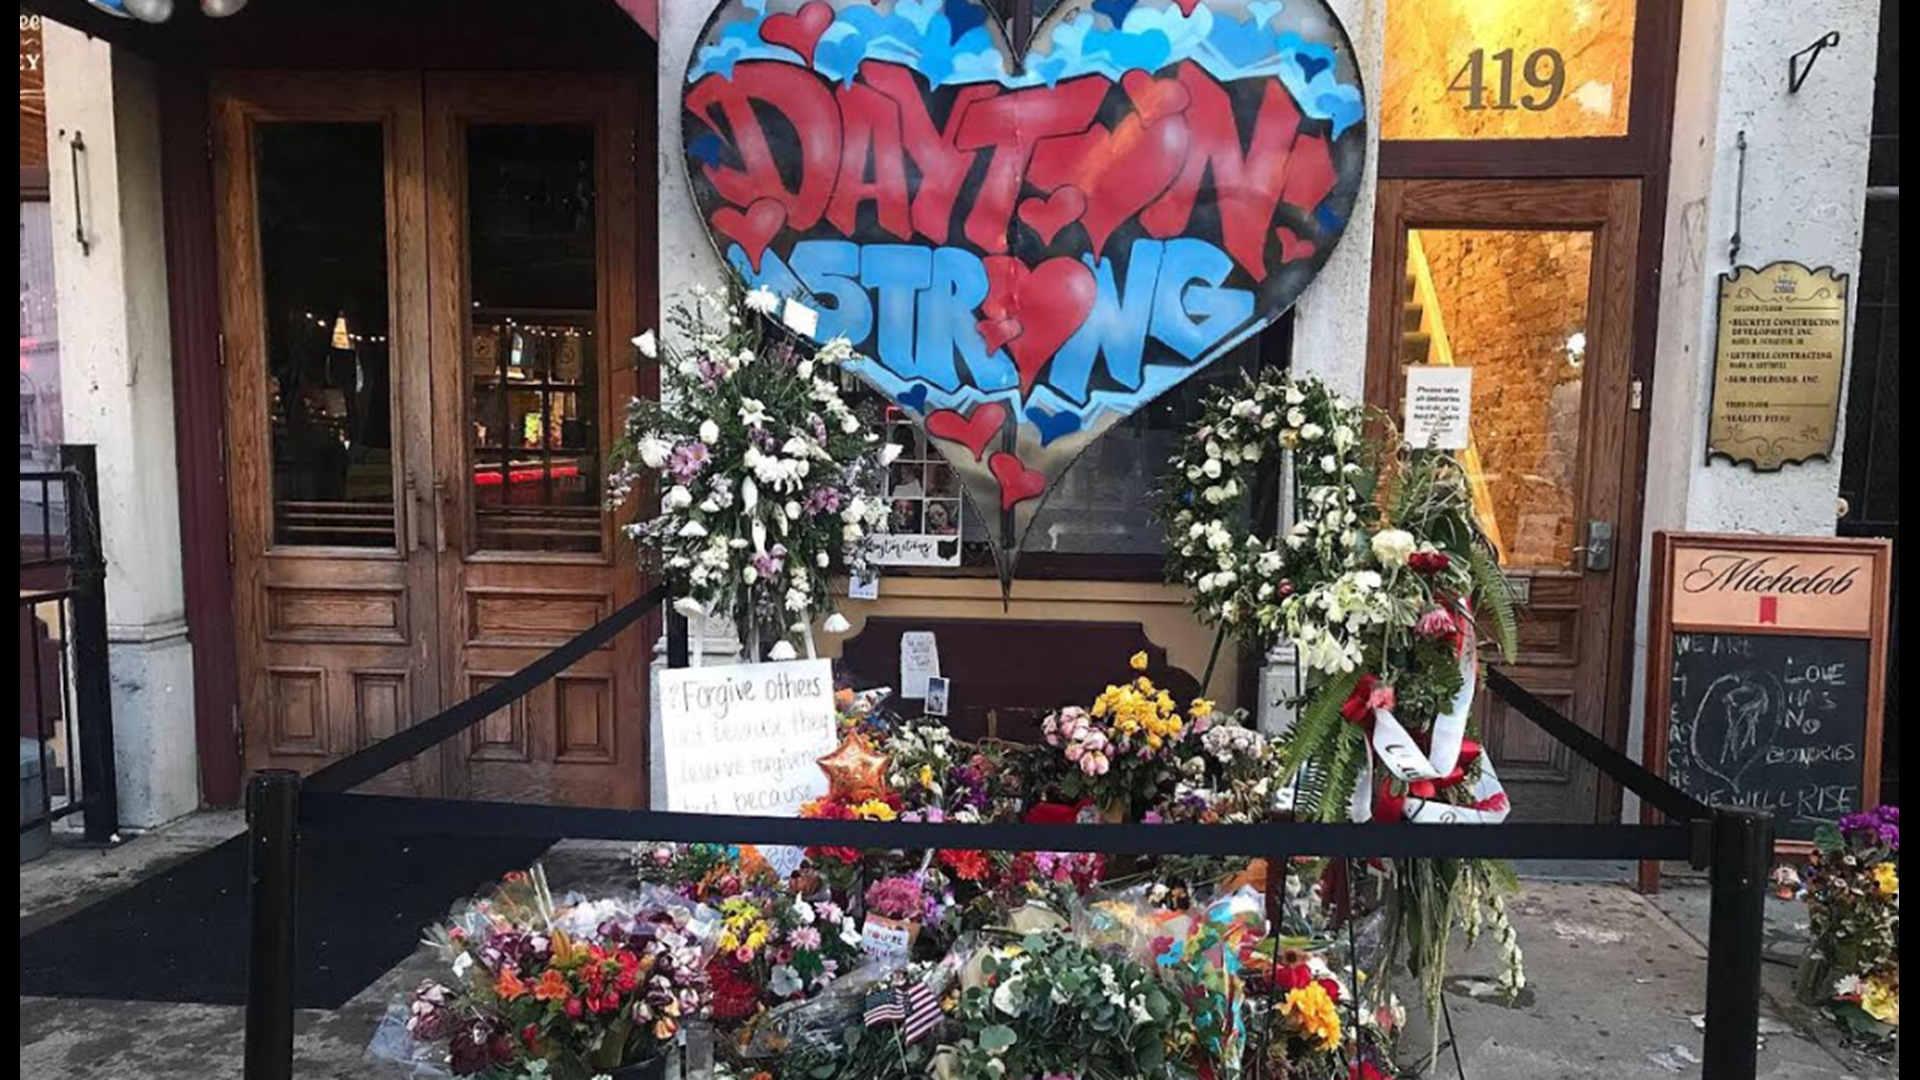 It has now been one year since gunfire rang out in Dayton, killing nine people.